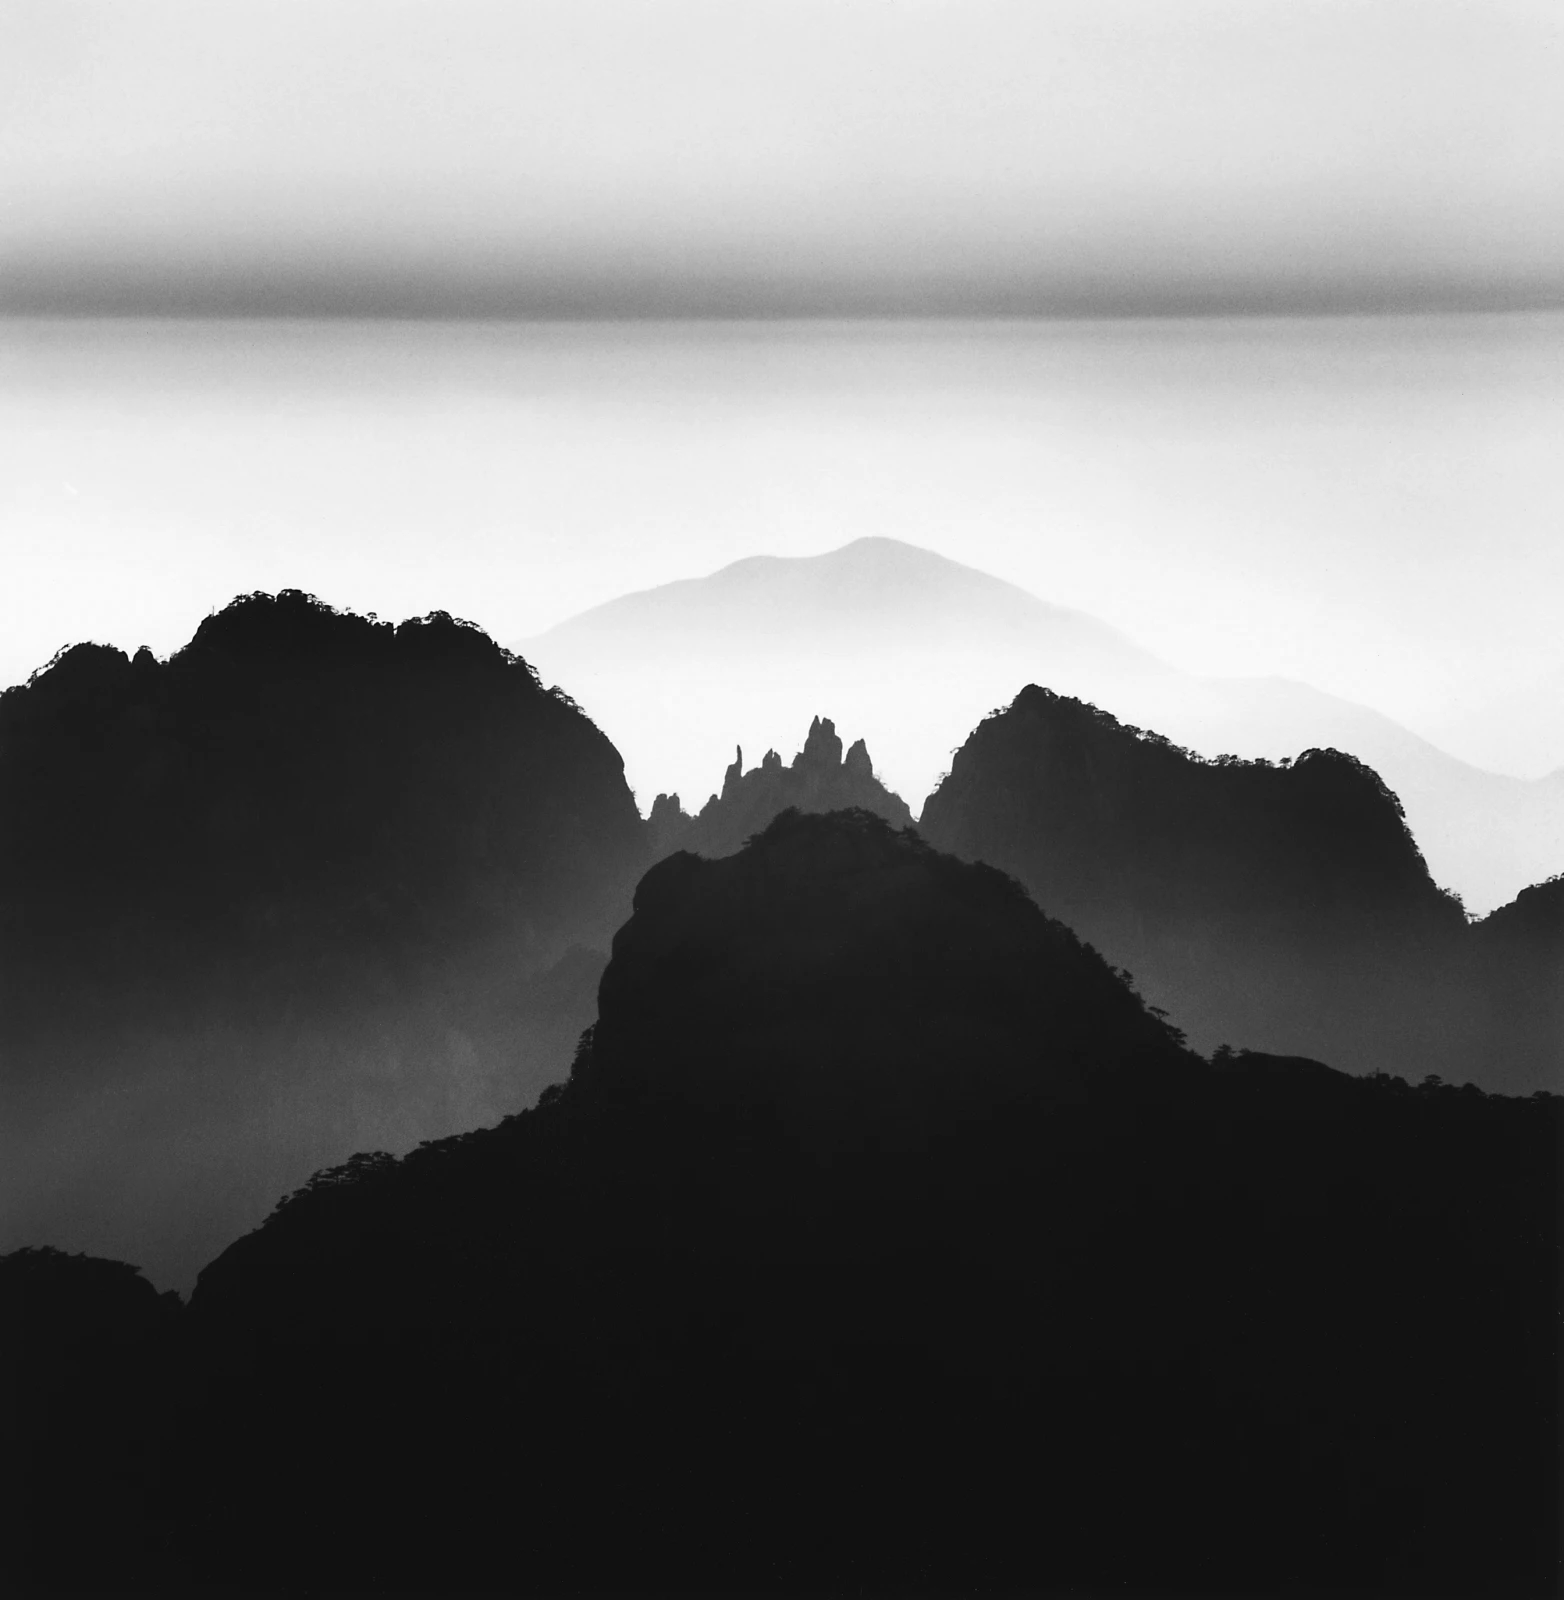 Michael Kenna — Images of the Seventh Day